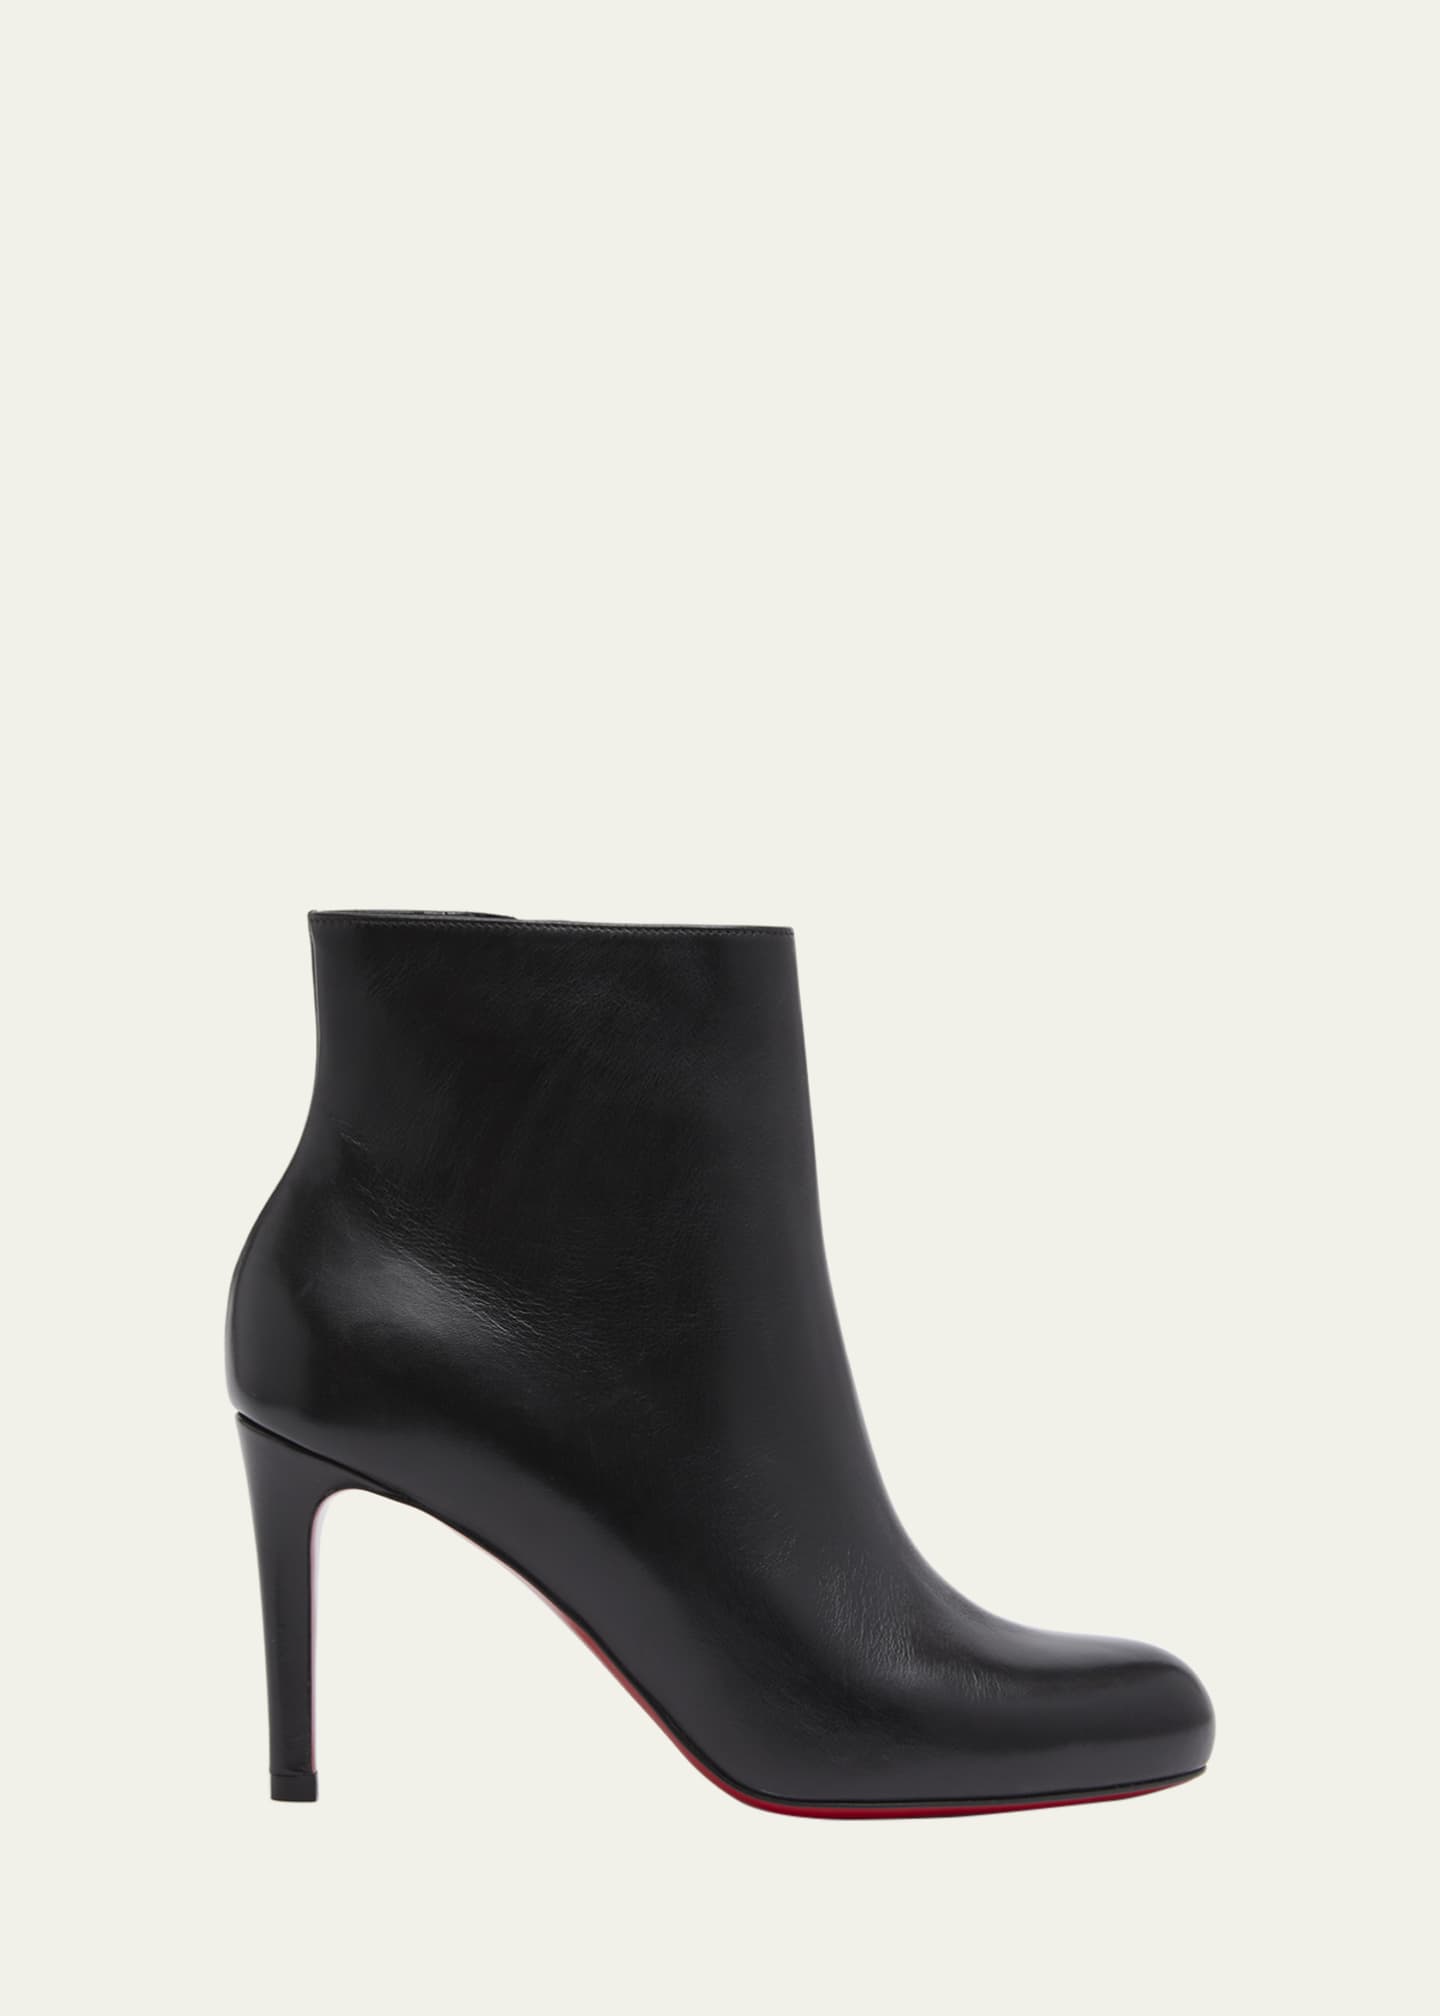 Ansigt opad Bedre Vær stille Christian Louboutin Pumppie Red Sole Leather Ankle Boots - Bergdorf Goodman